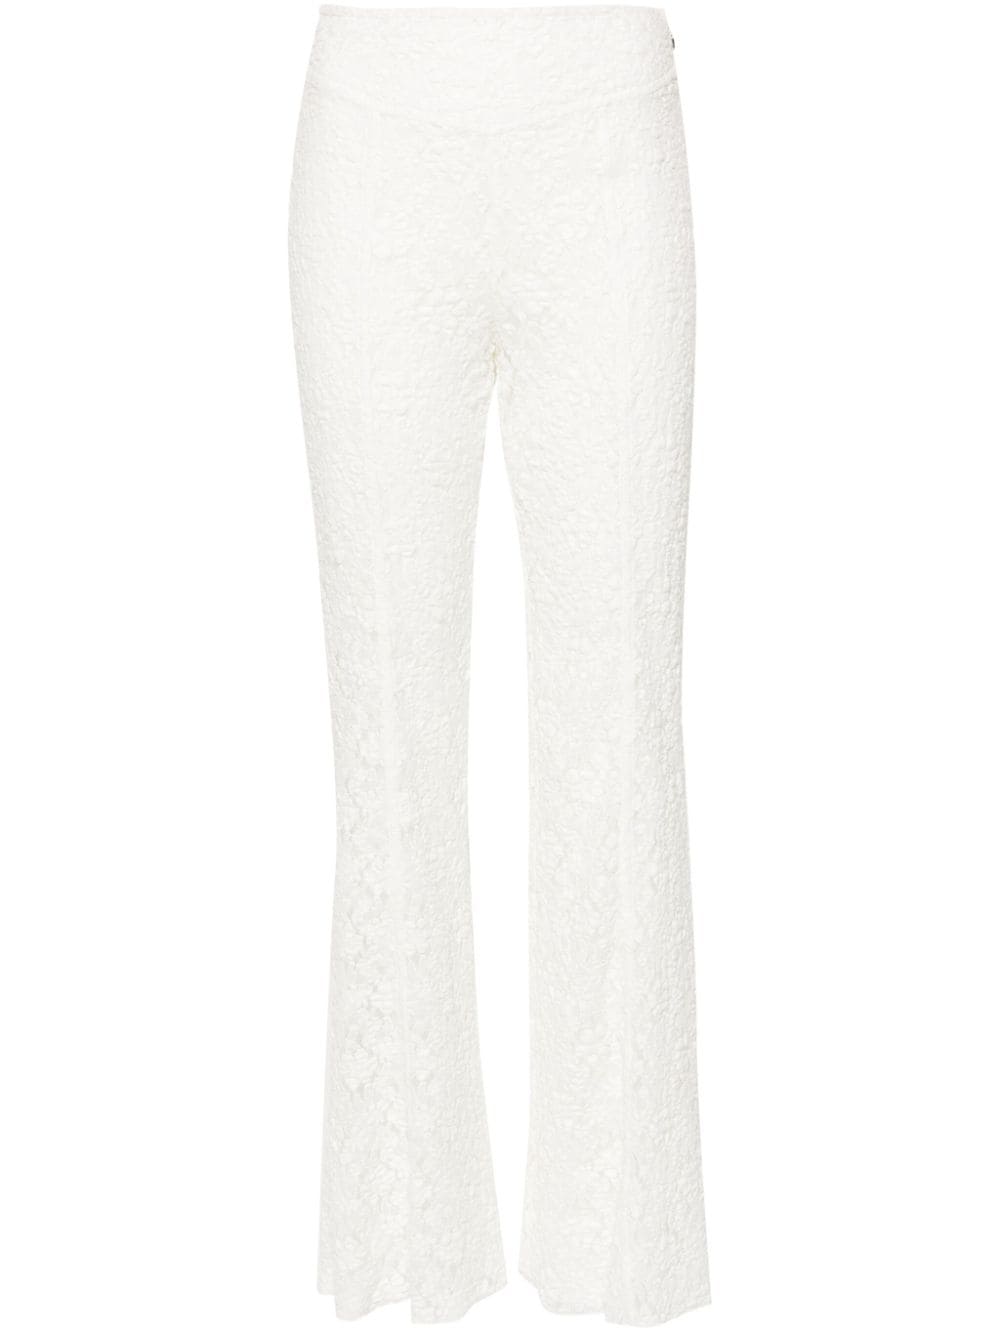 ROTATE BIRGER CHRISTENSEN floral-lace flared trousers - Weiß